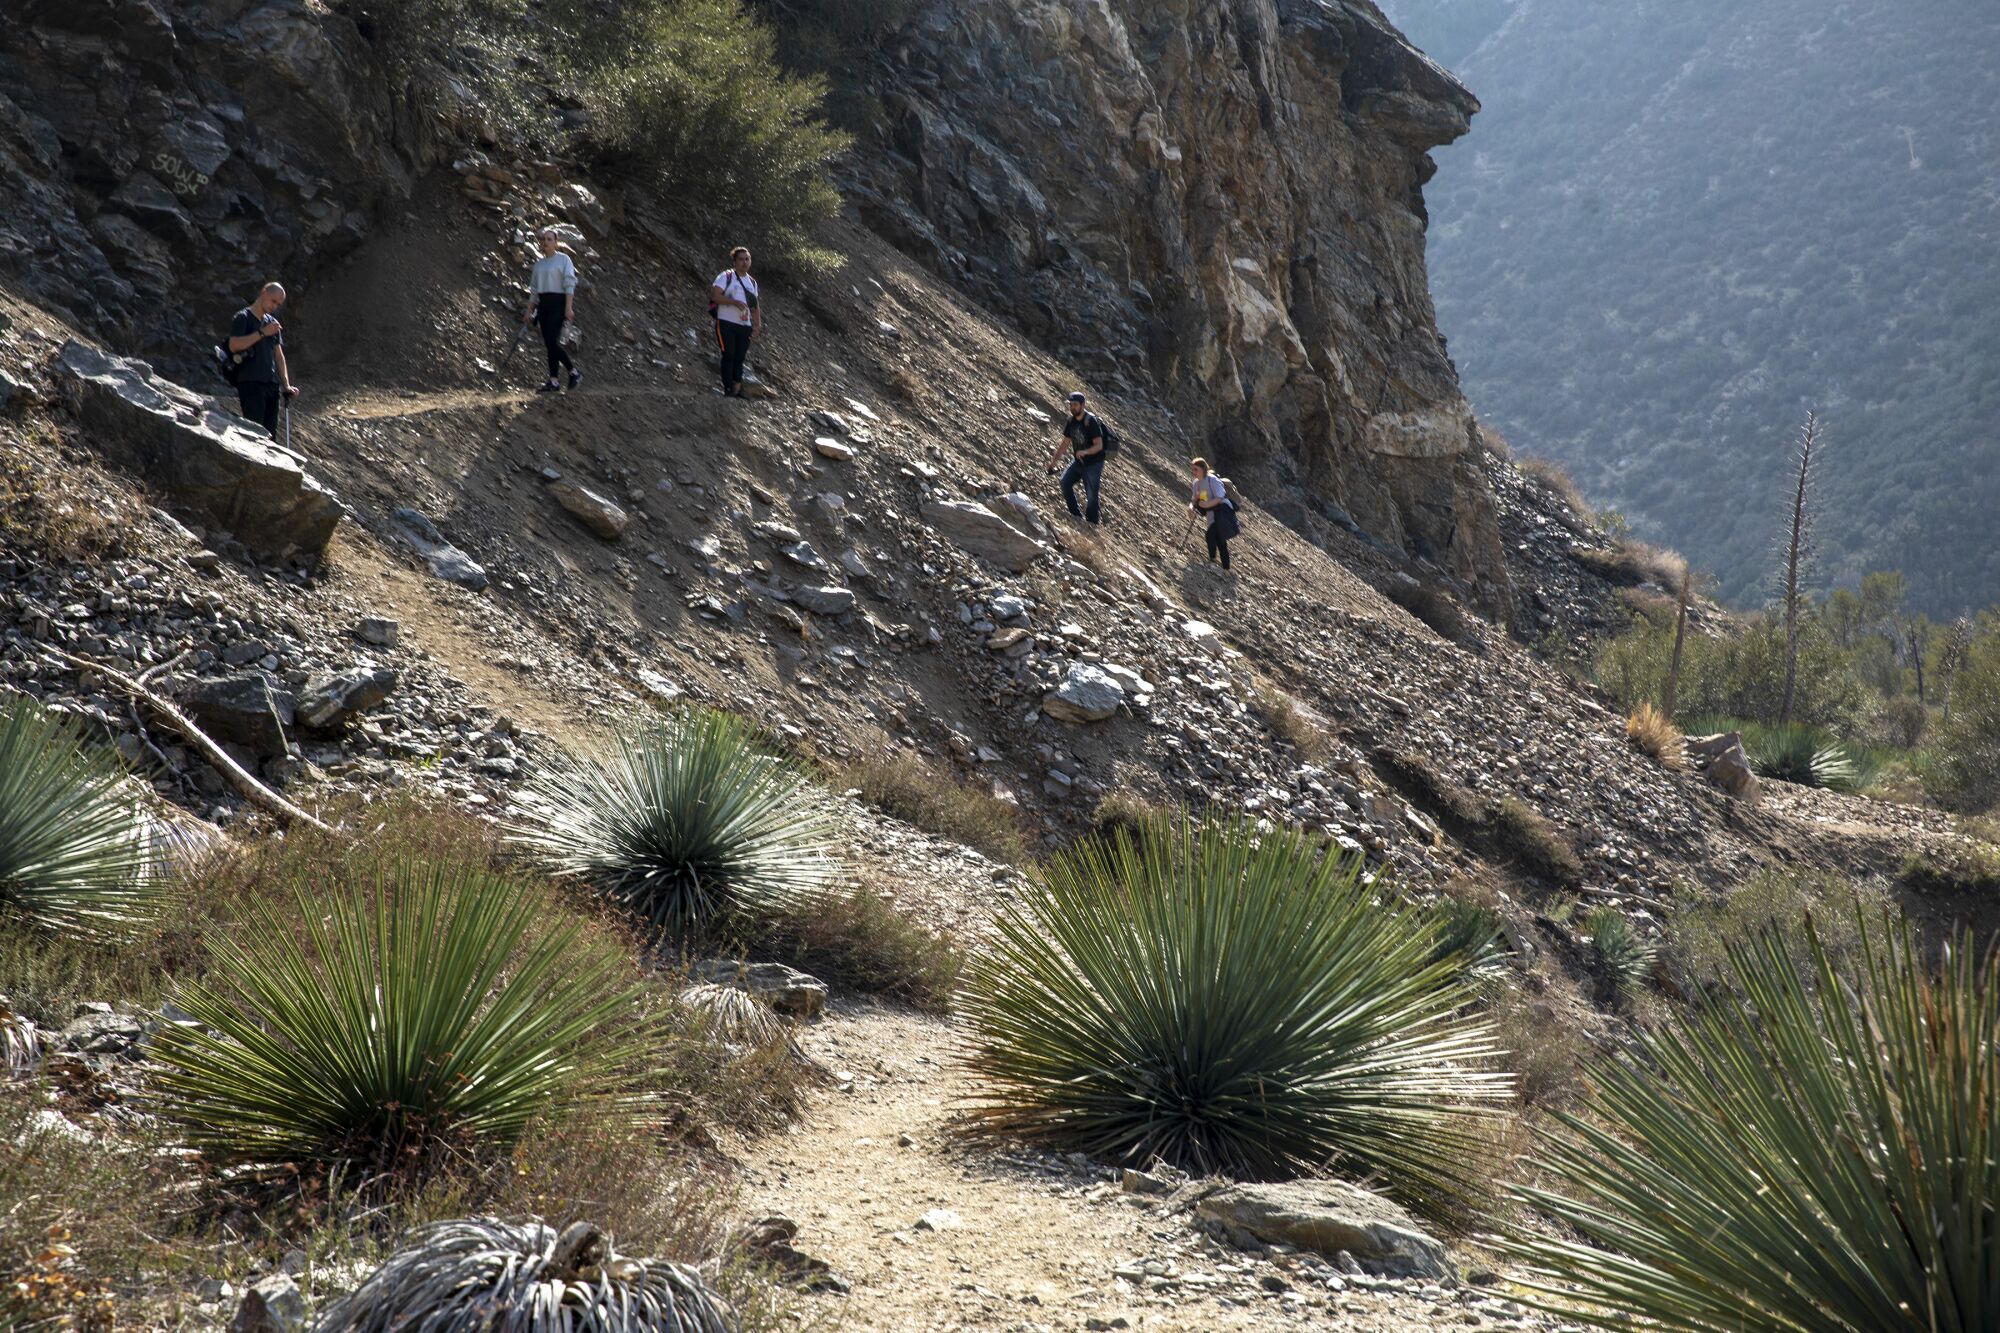 Hikers make their way along a rocky slope on the trail to the Bridge to Nowhere.